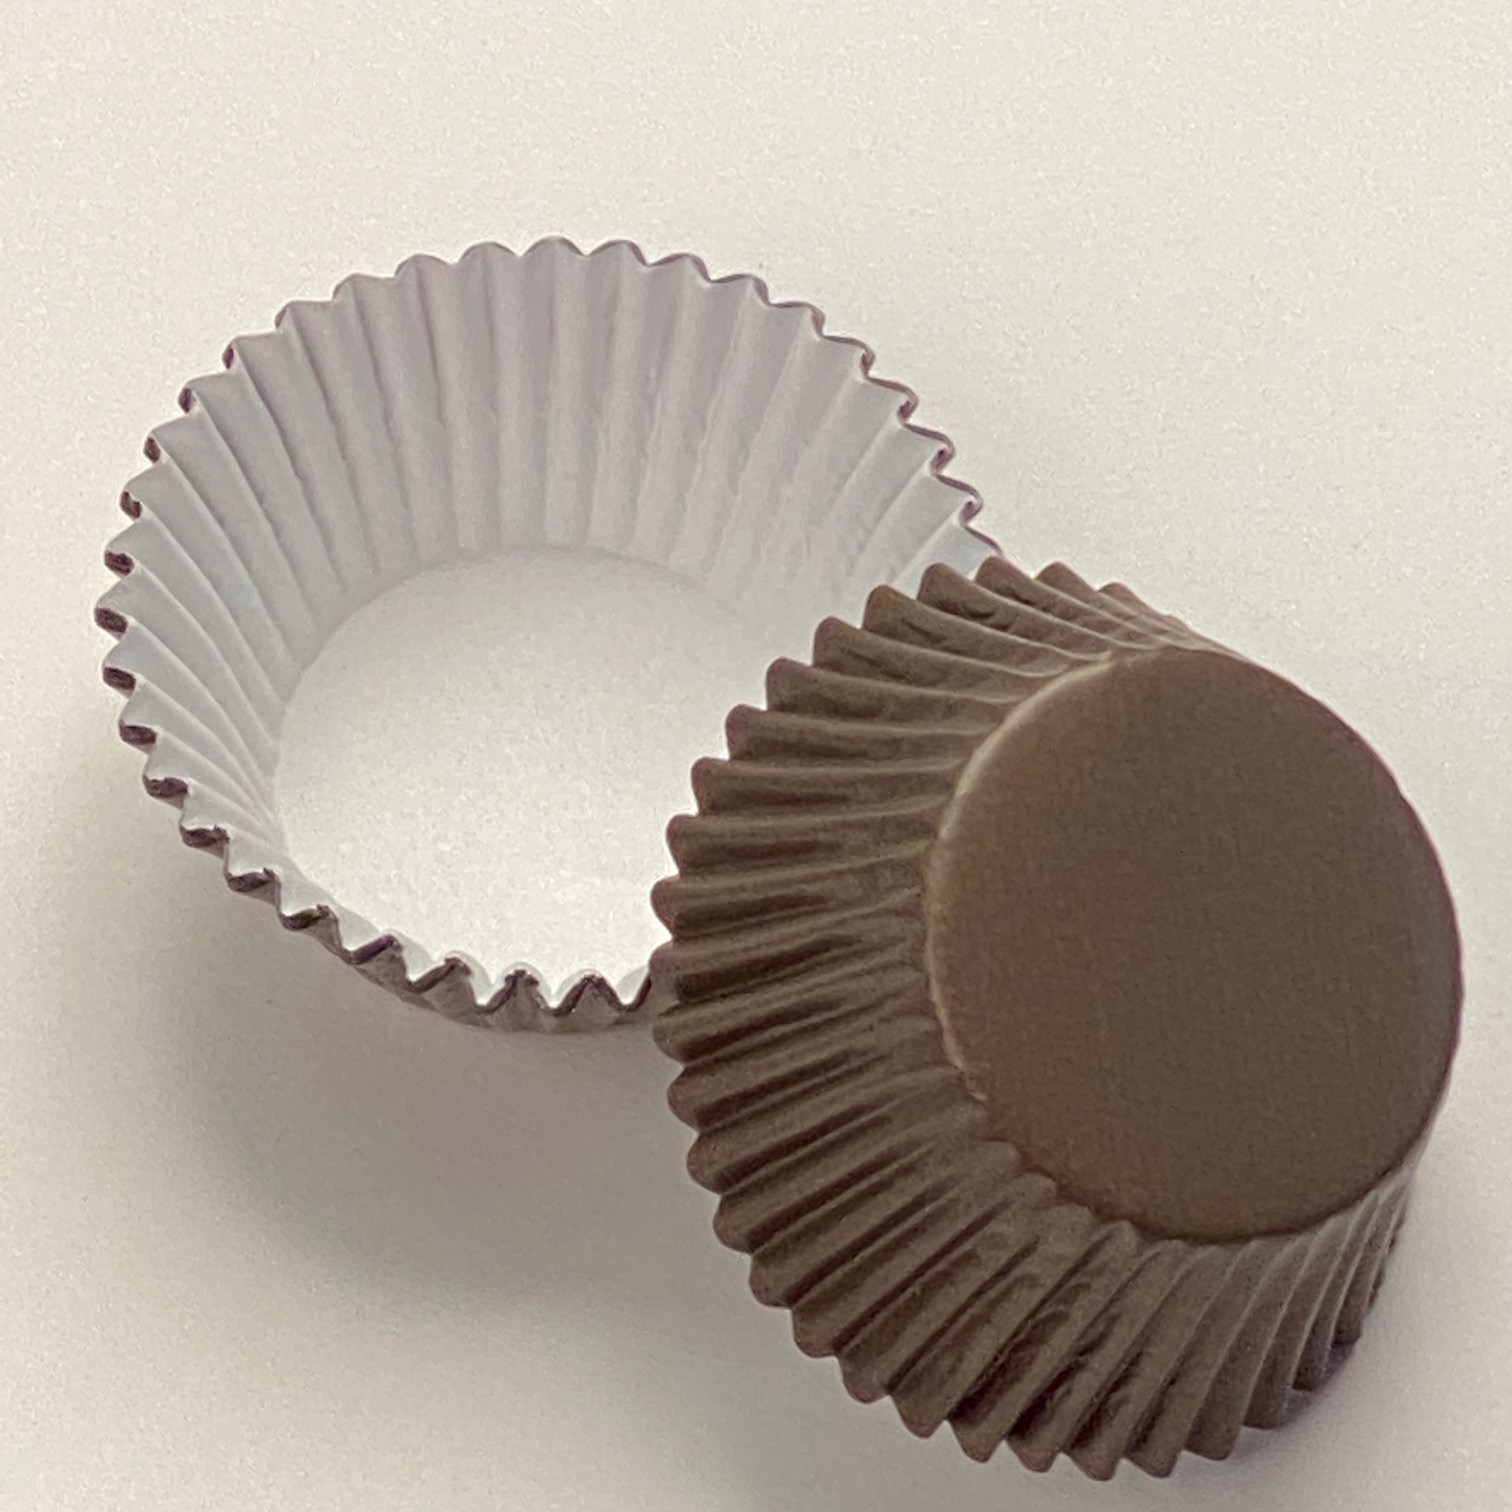 Ivory Foil Standard Cupcake Liners